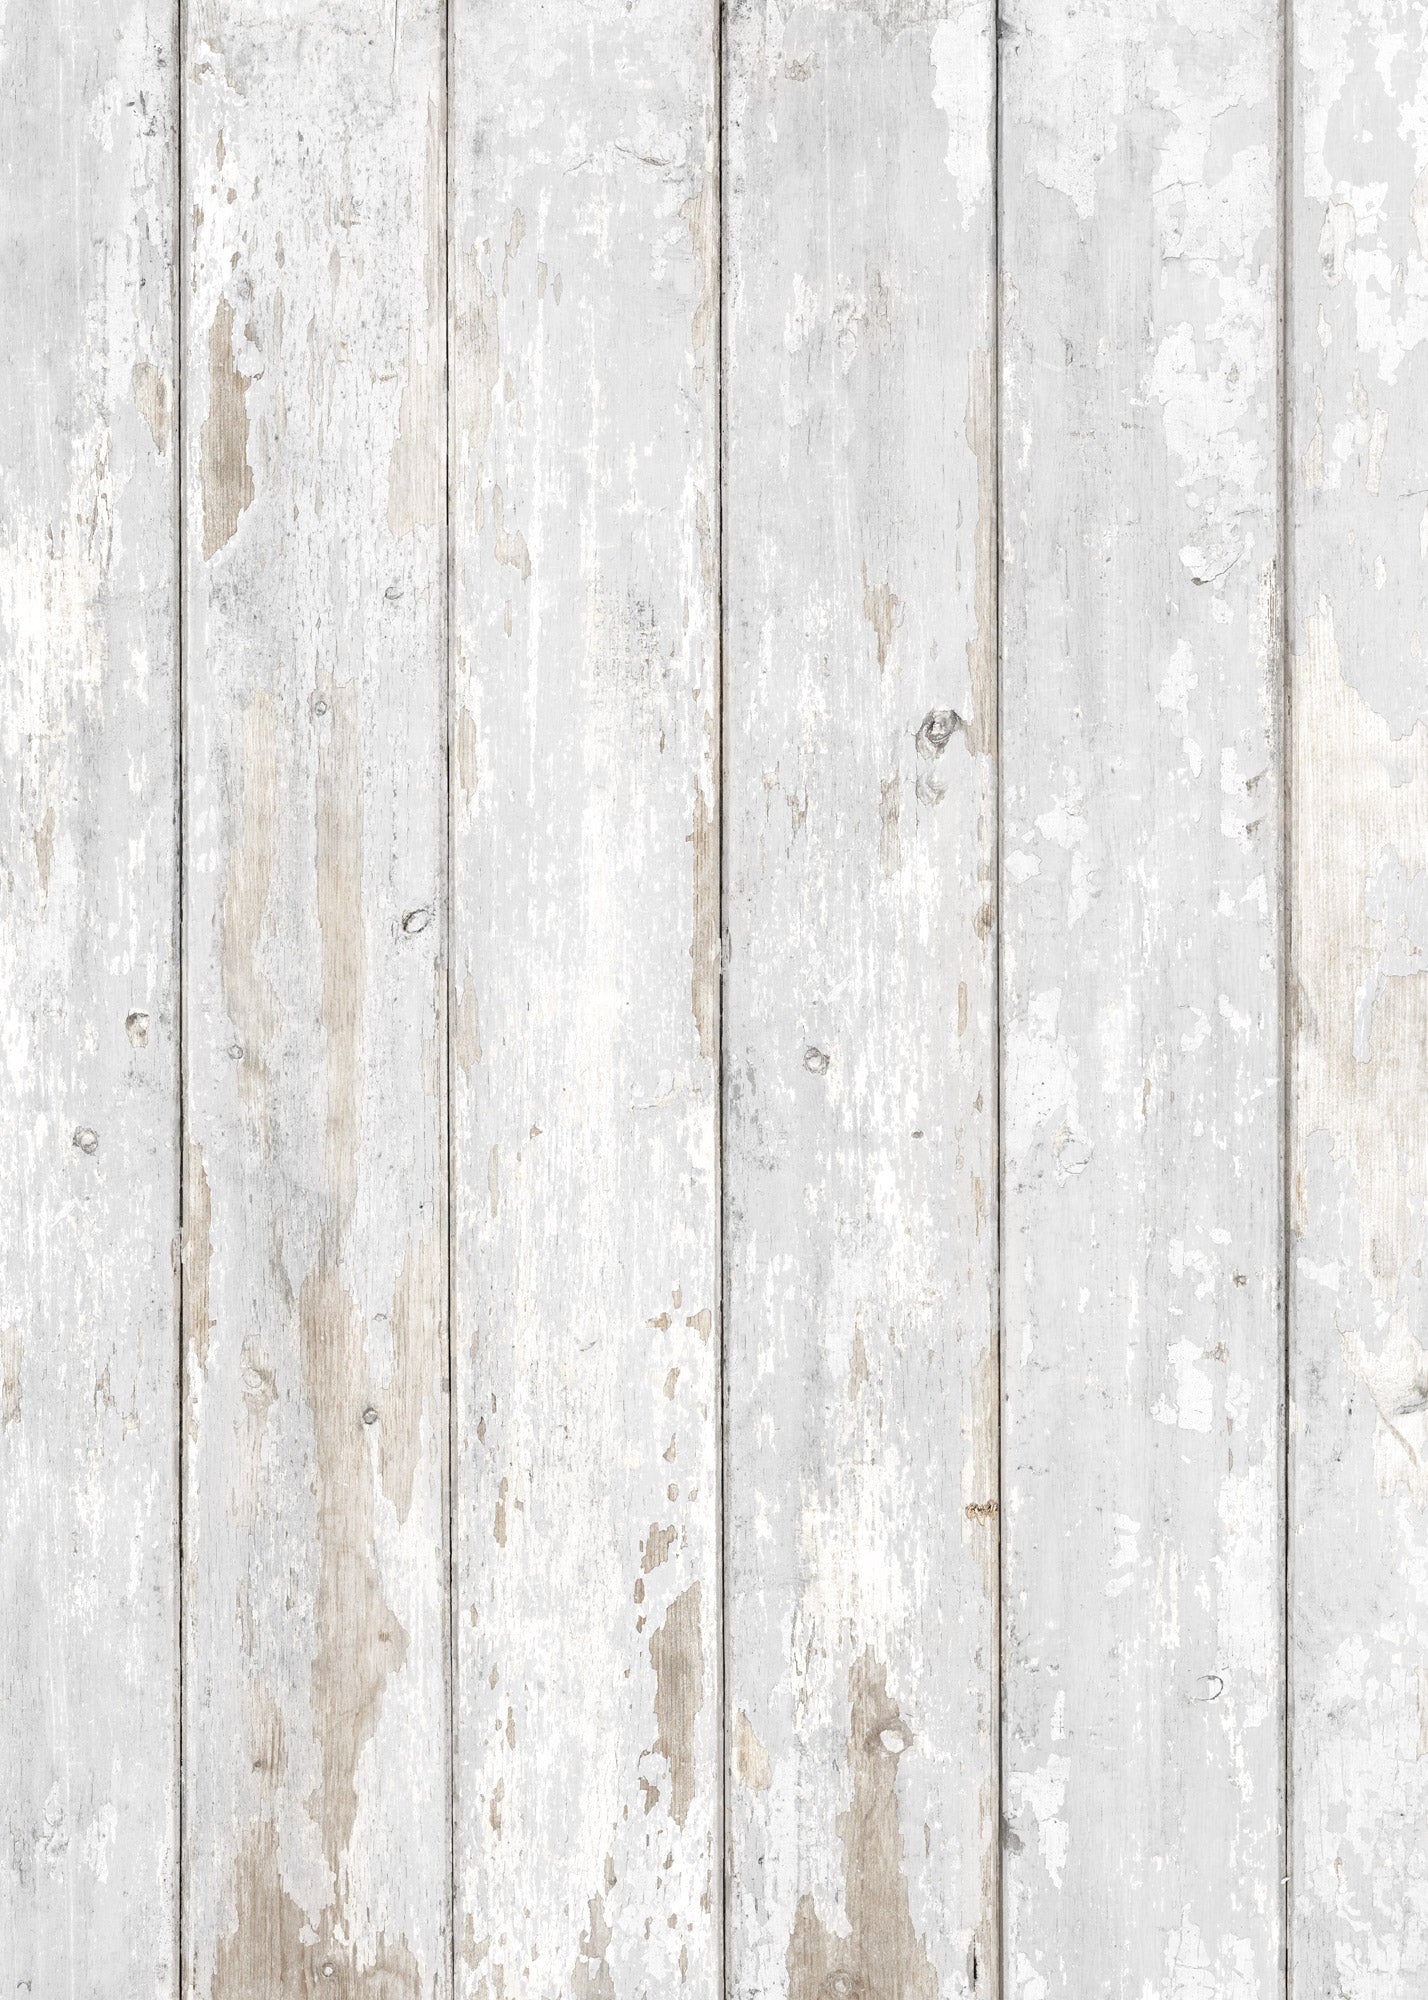 Weatherboard Vinyl Photography Backdrop by Club Backdrops